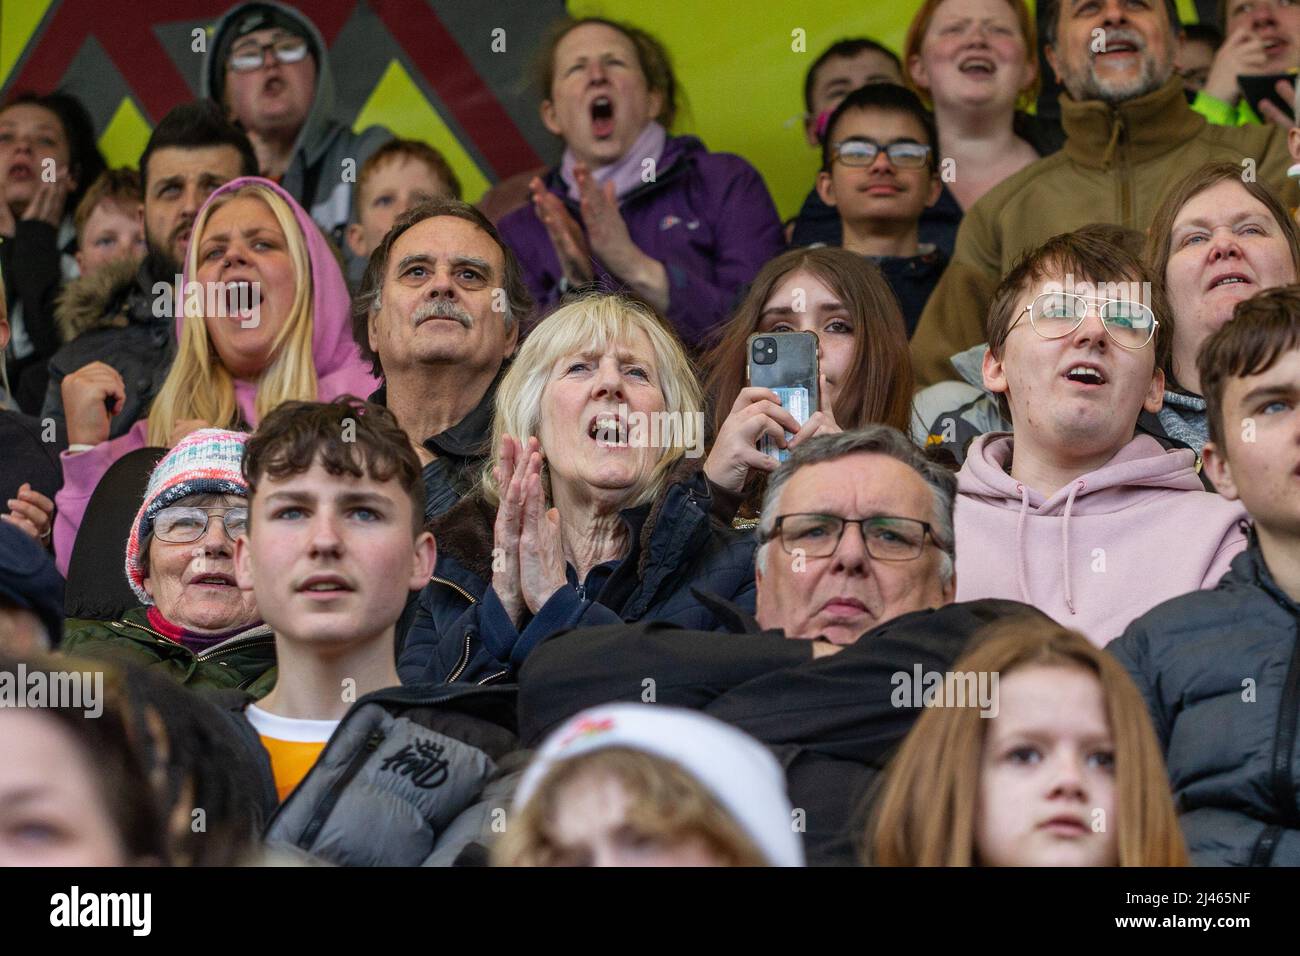 Football / soccer fans and spectators with facial expressions react to game they are watching Stock Photo